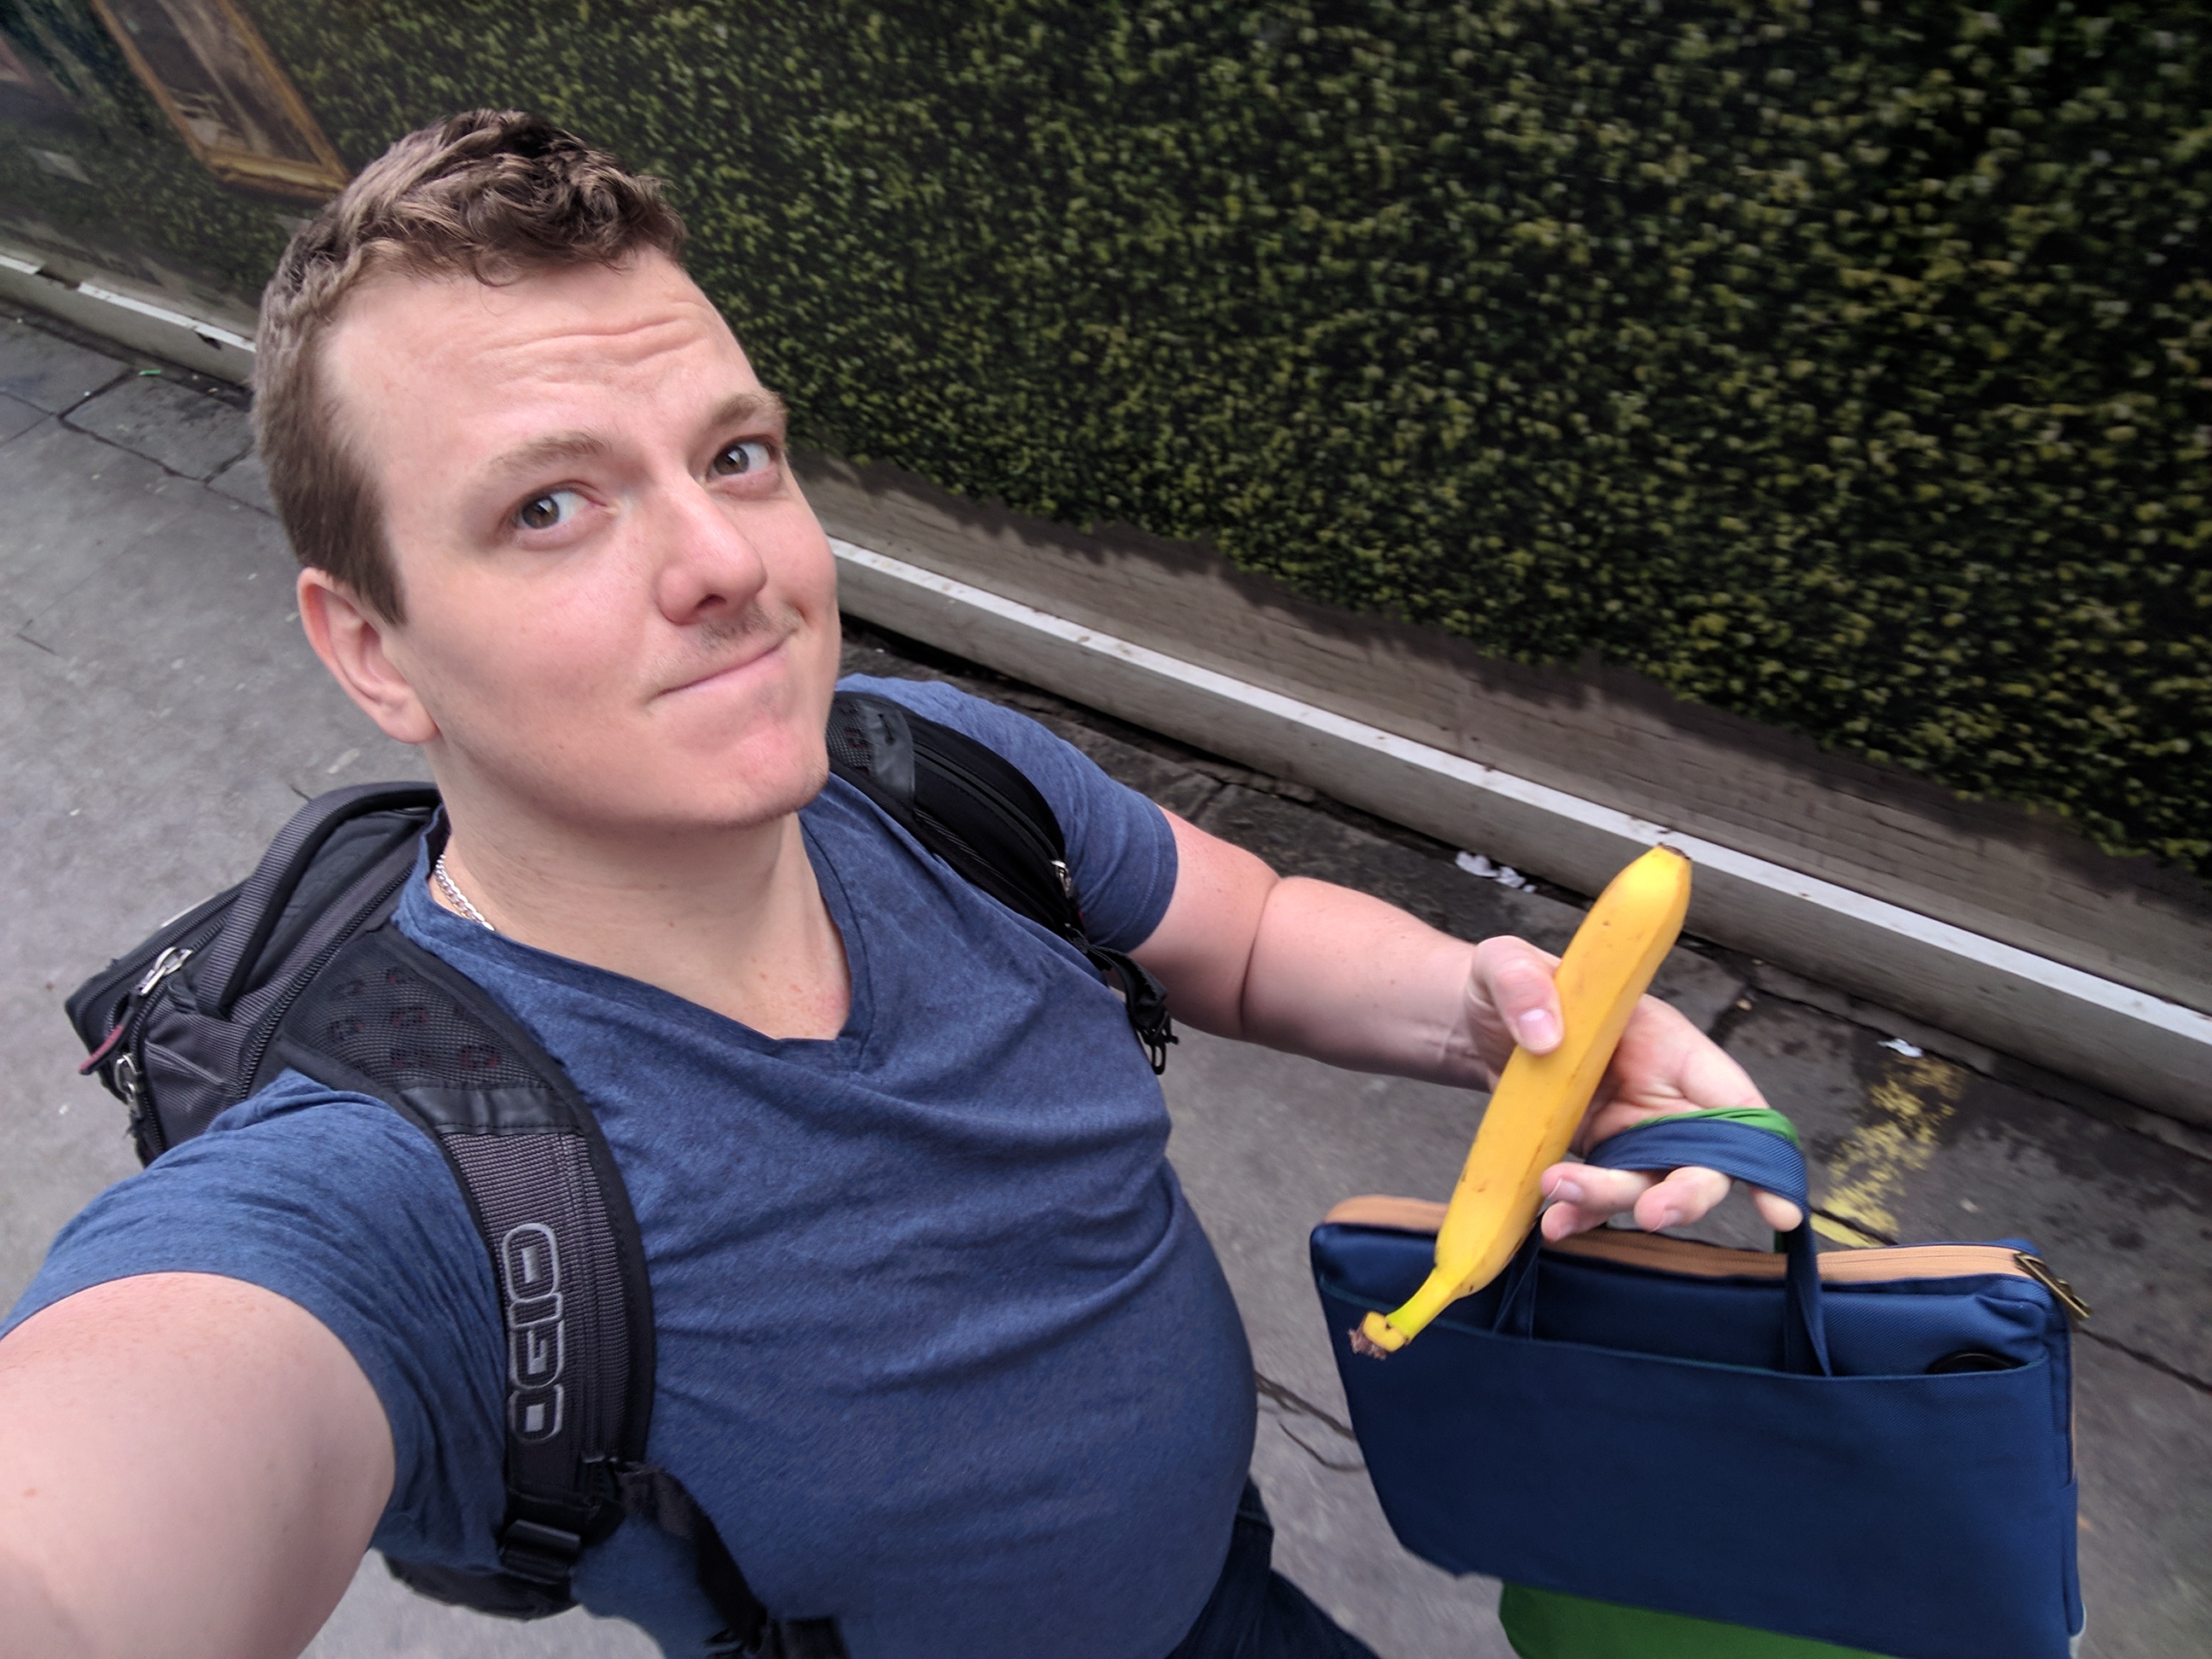 Me walking down the street, carrying all my bags plus a banana.